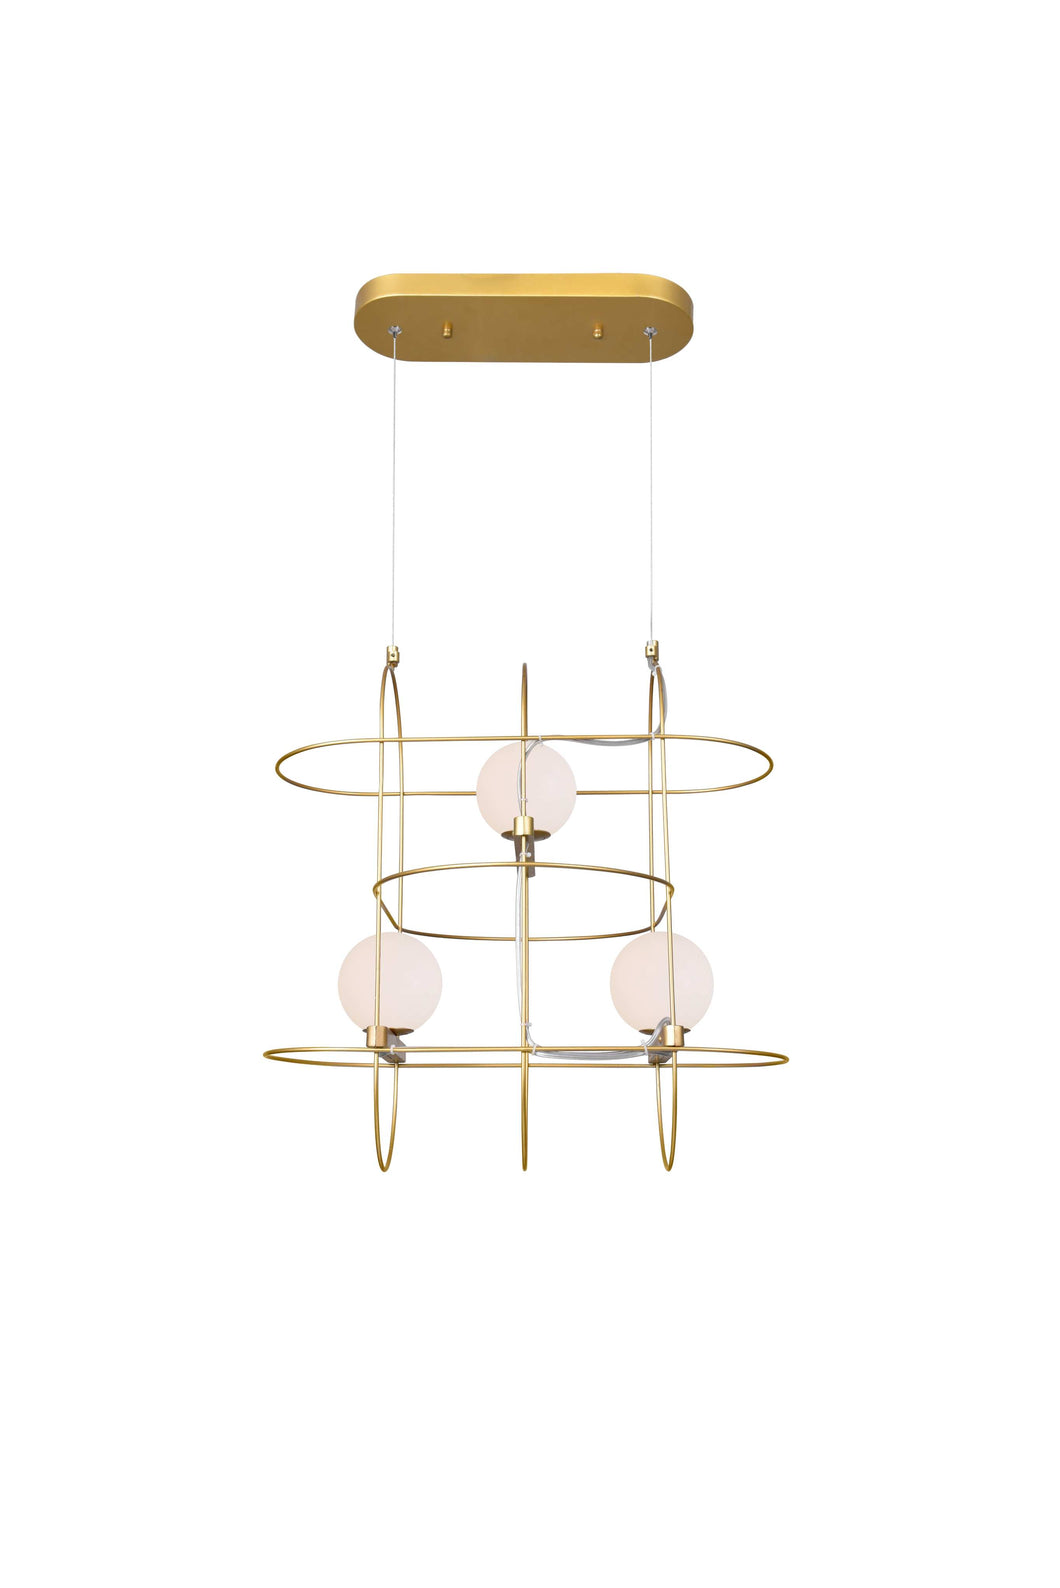 3 Light Chandelier with Medallion Gold Finish